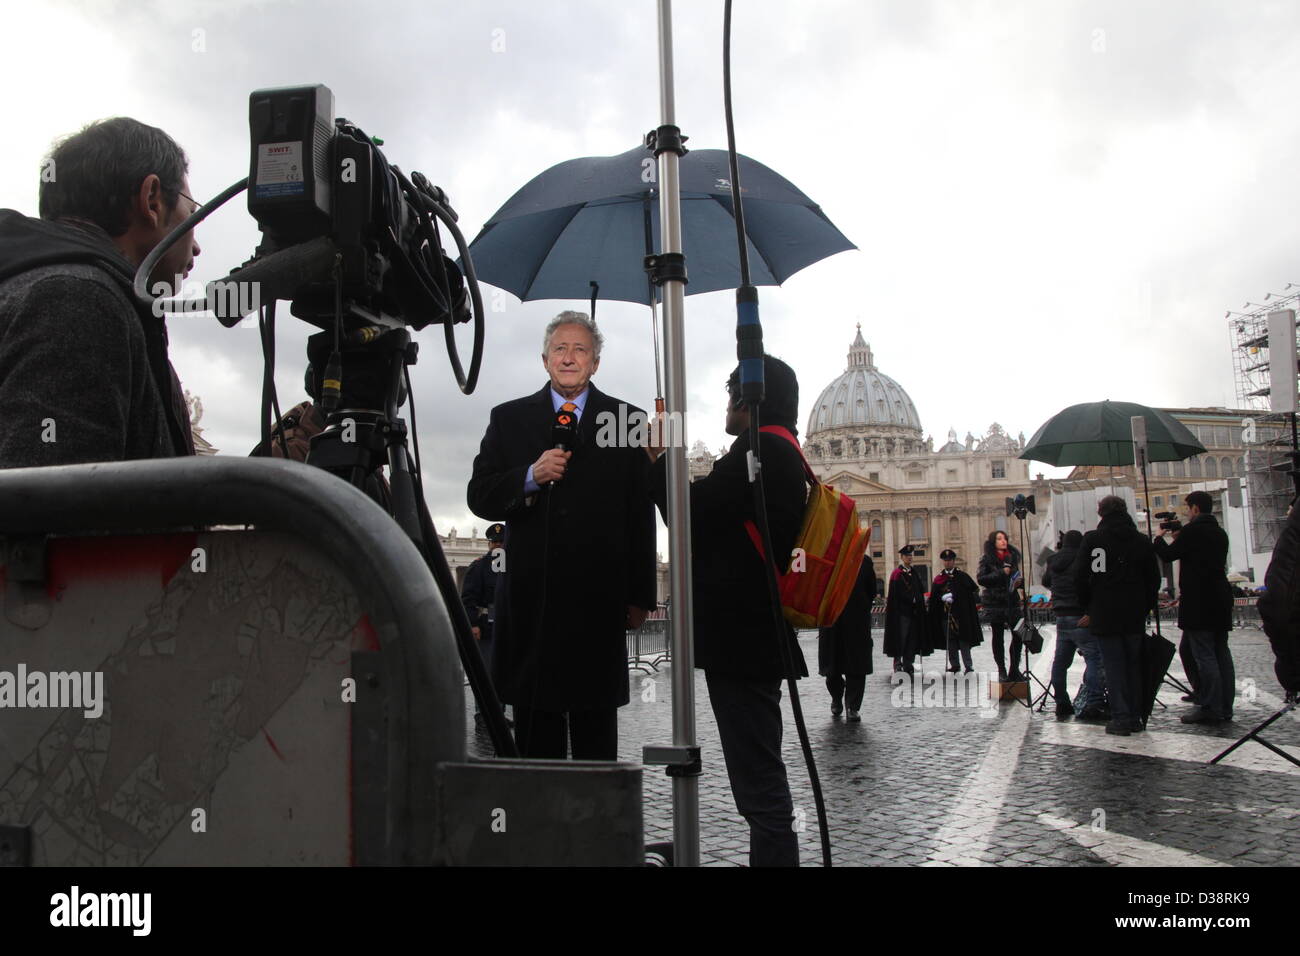 12 Feb 2013 The world's media at the Vatican City, Rome following the resignation announcement by Pope Benedict XVI Stock Photo